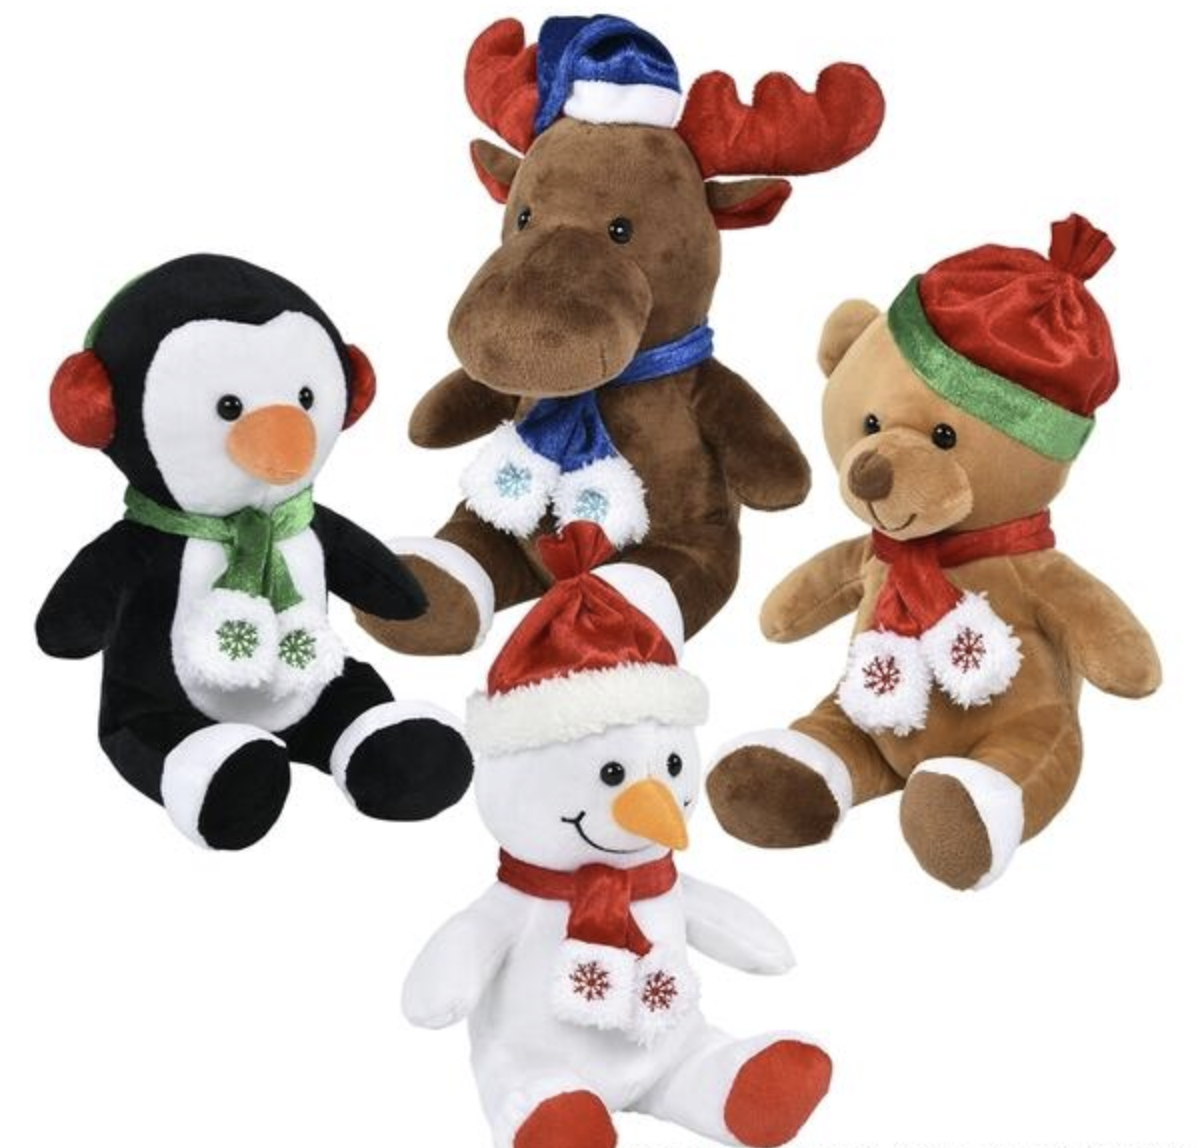 Buy 8" CHRISTMAS plush CHARACTERS WITH SCARF in Bulk